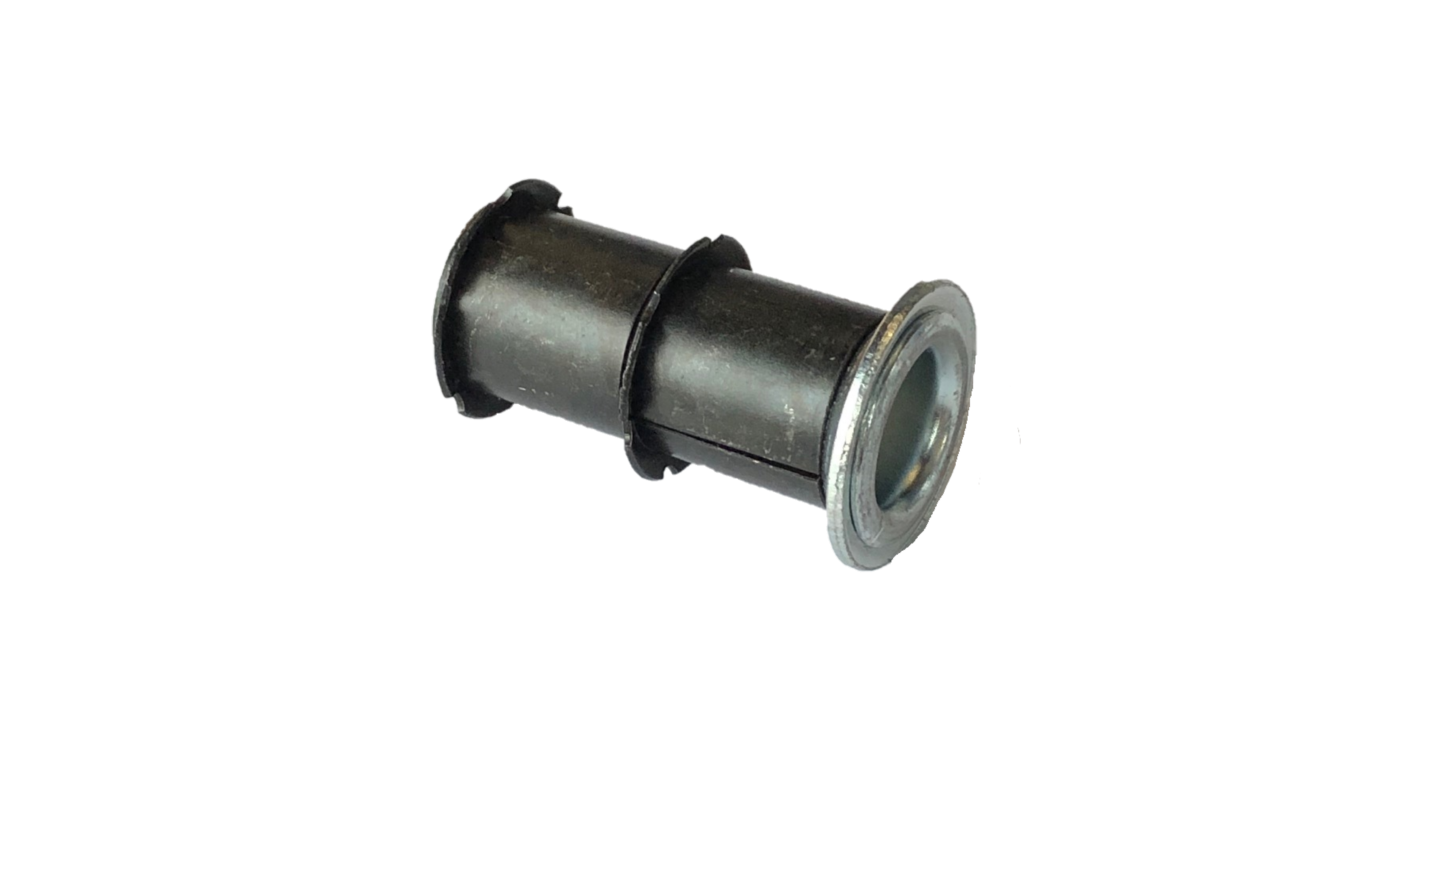 Caster Socket (round); Grip Ring; 3/4" O.D; fits in 7/8" 16 Ga tubing; Metal; Spring Retention. Fits 7/16" GR stems up to 1-1/2 long. (Item #87952)